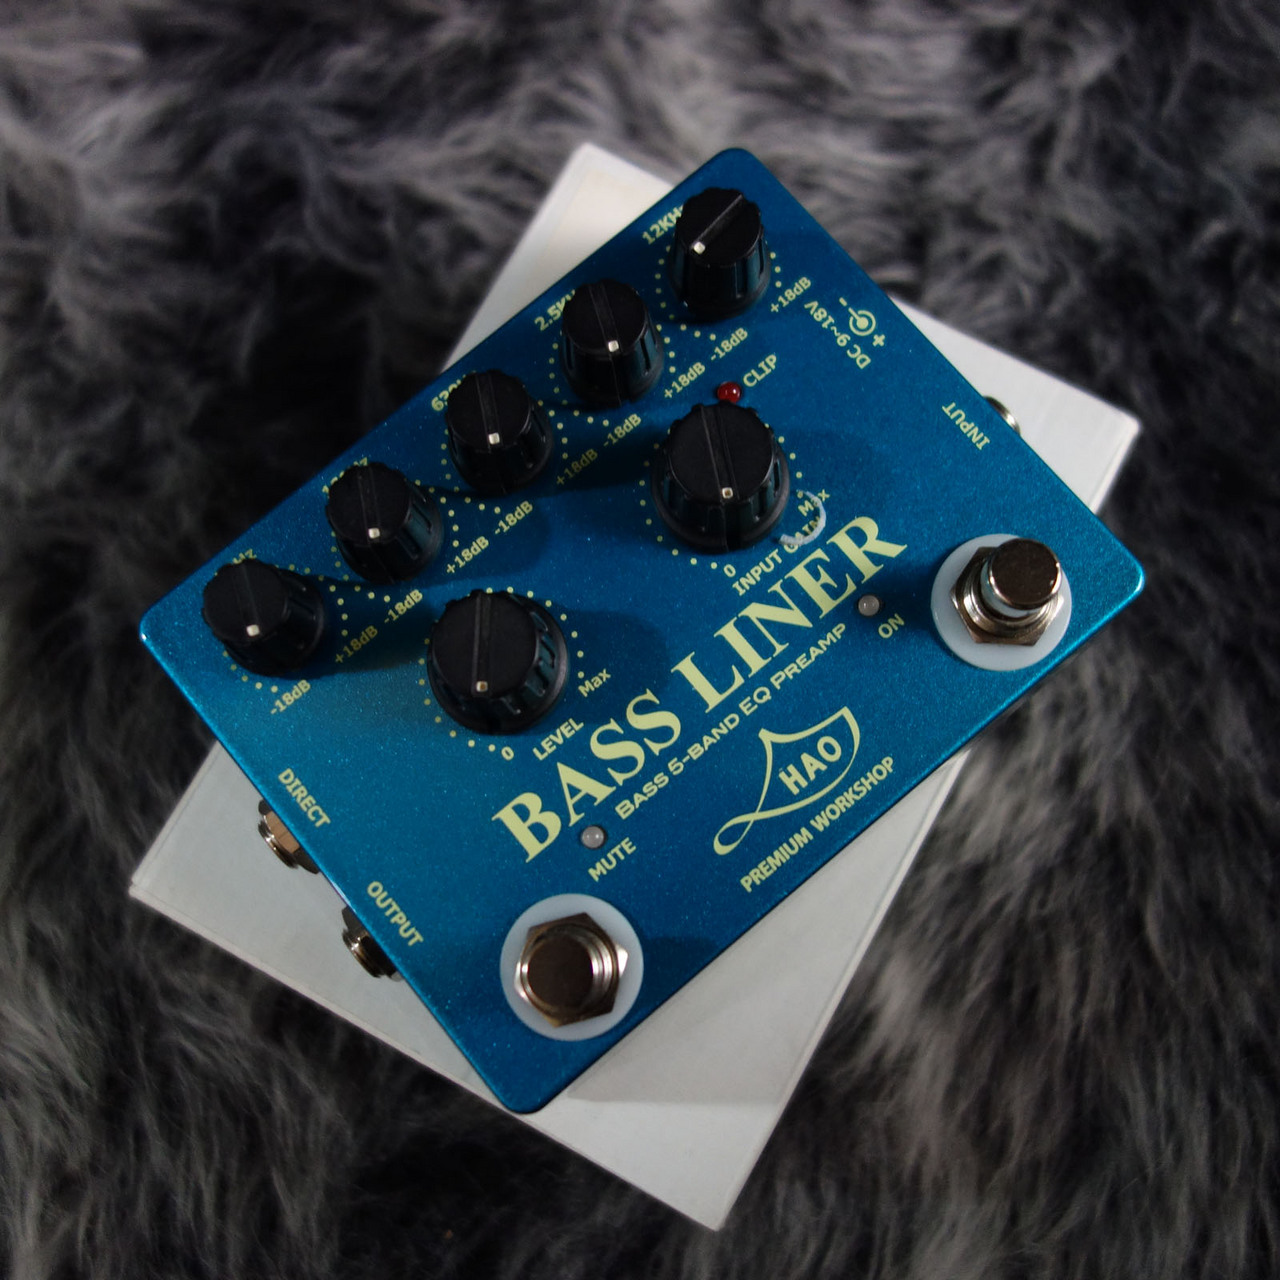 HAO BL-1 BASS LINER BASS 5-BAND EQ PREAMP ベースプリアンプ i8my1cf